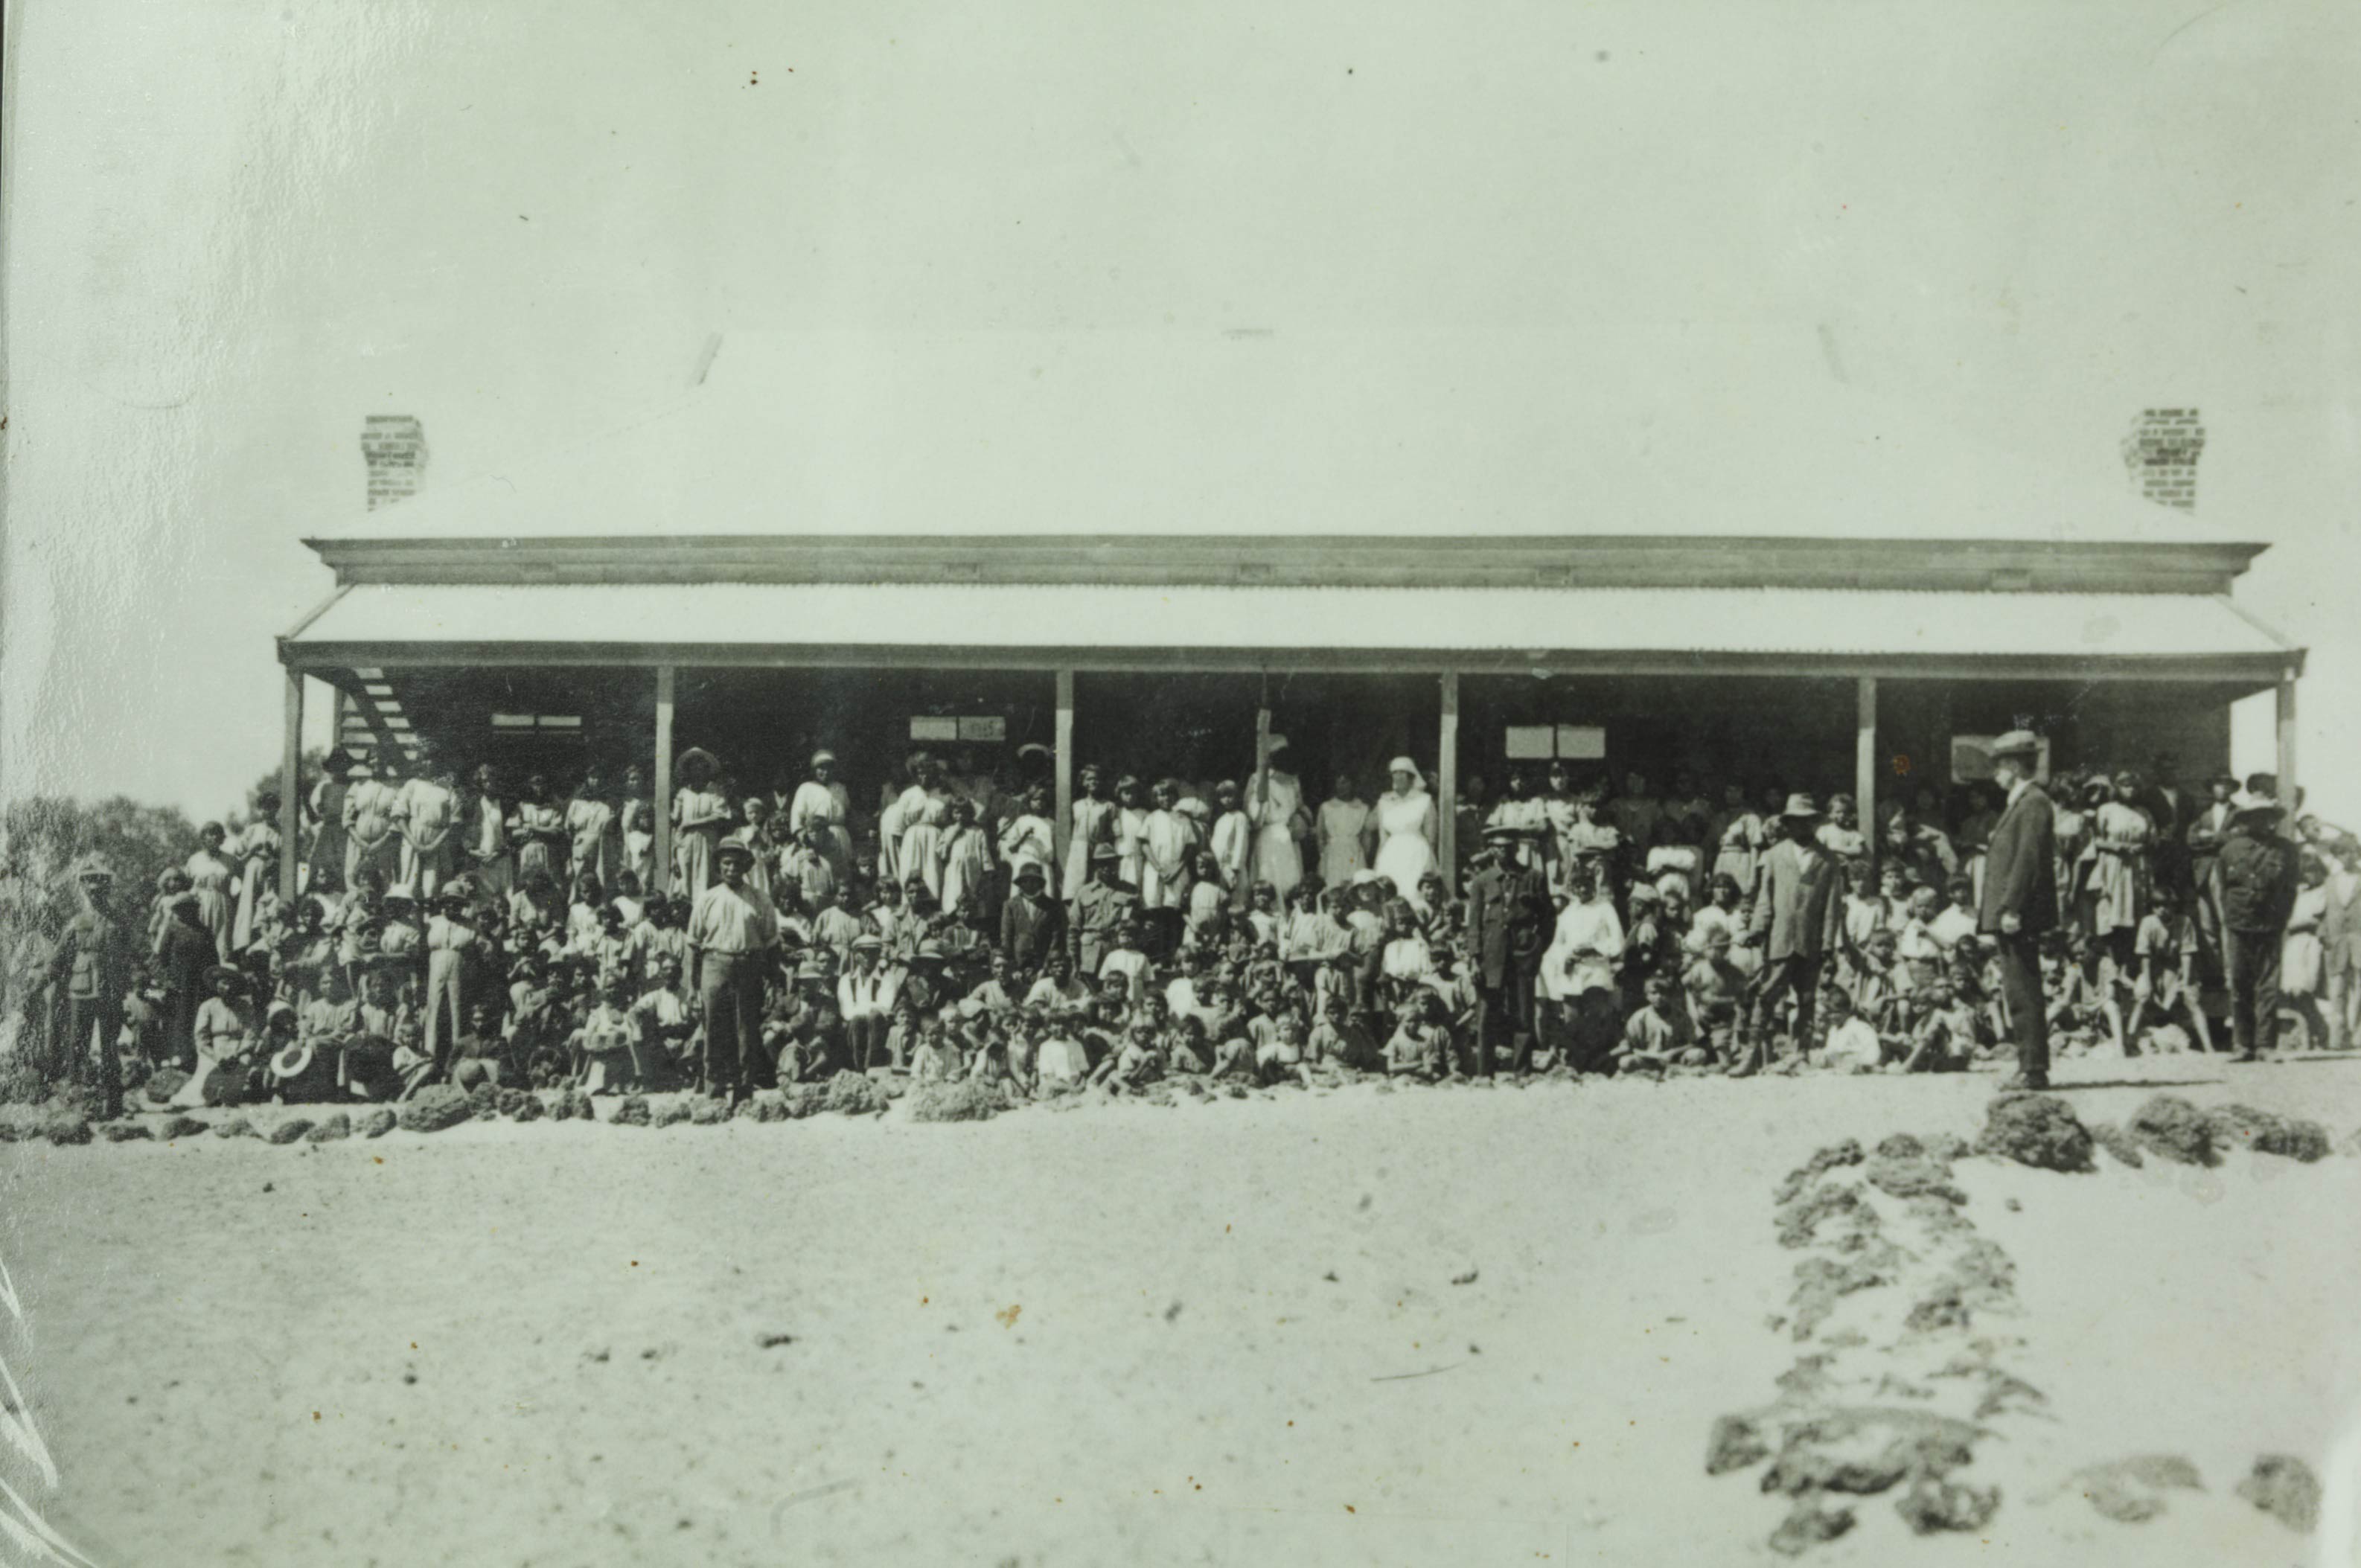 Histoic photo of the inmates at Moore River Native Settlement